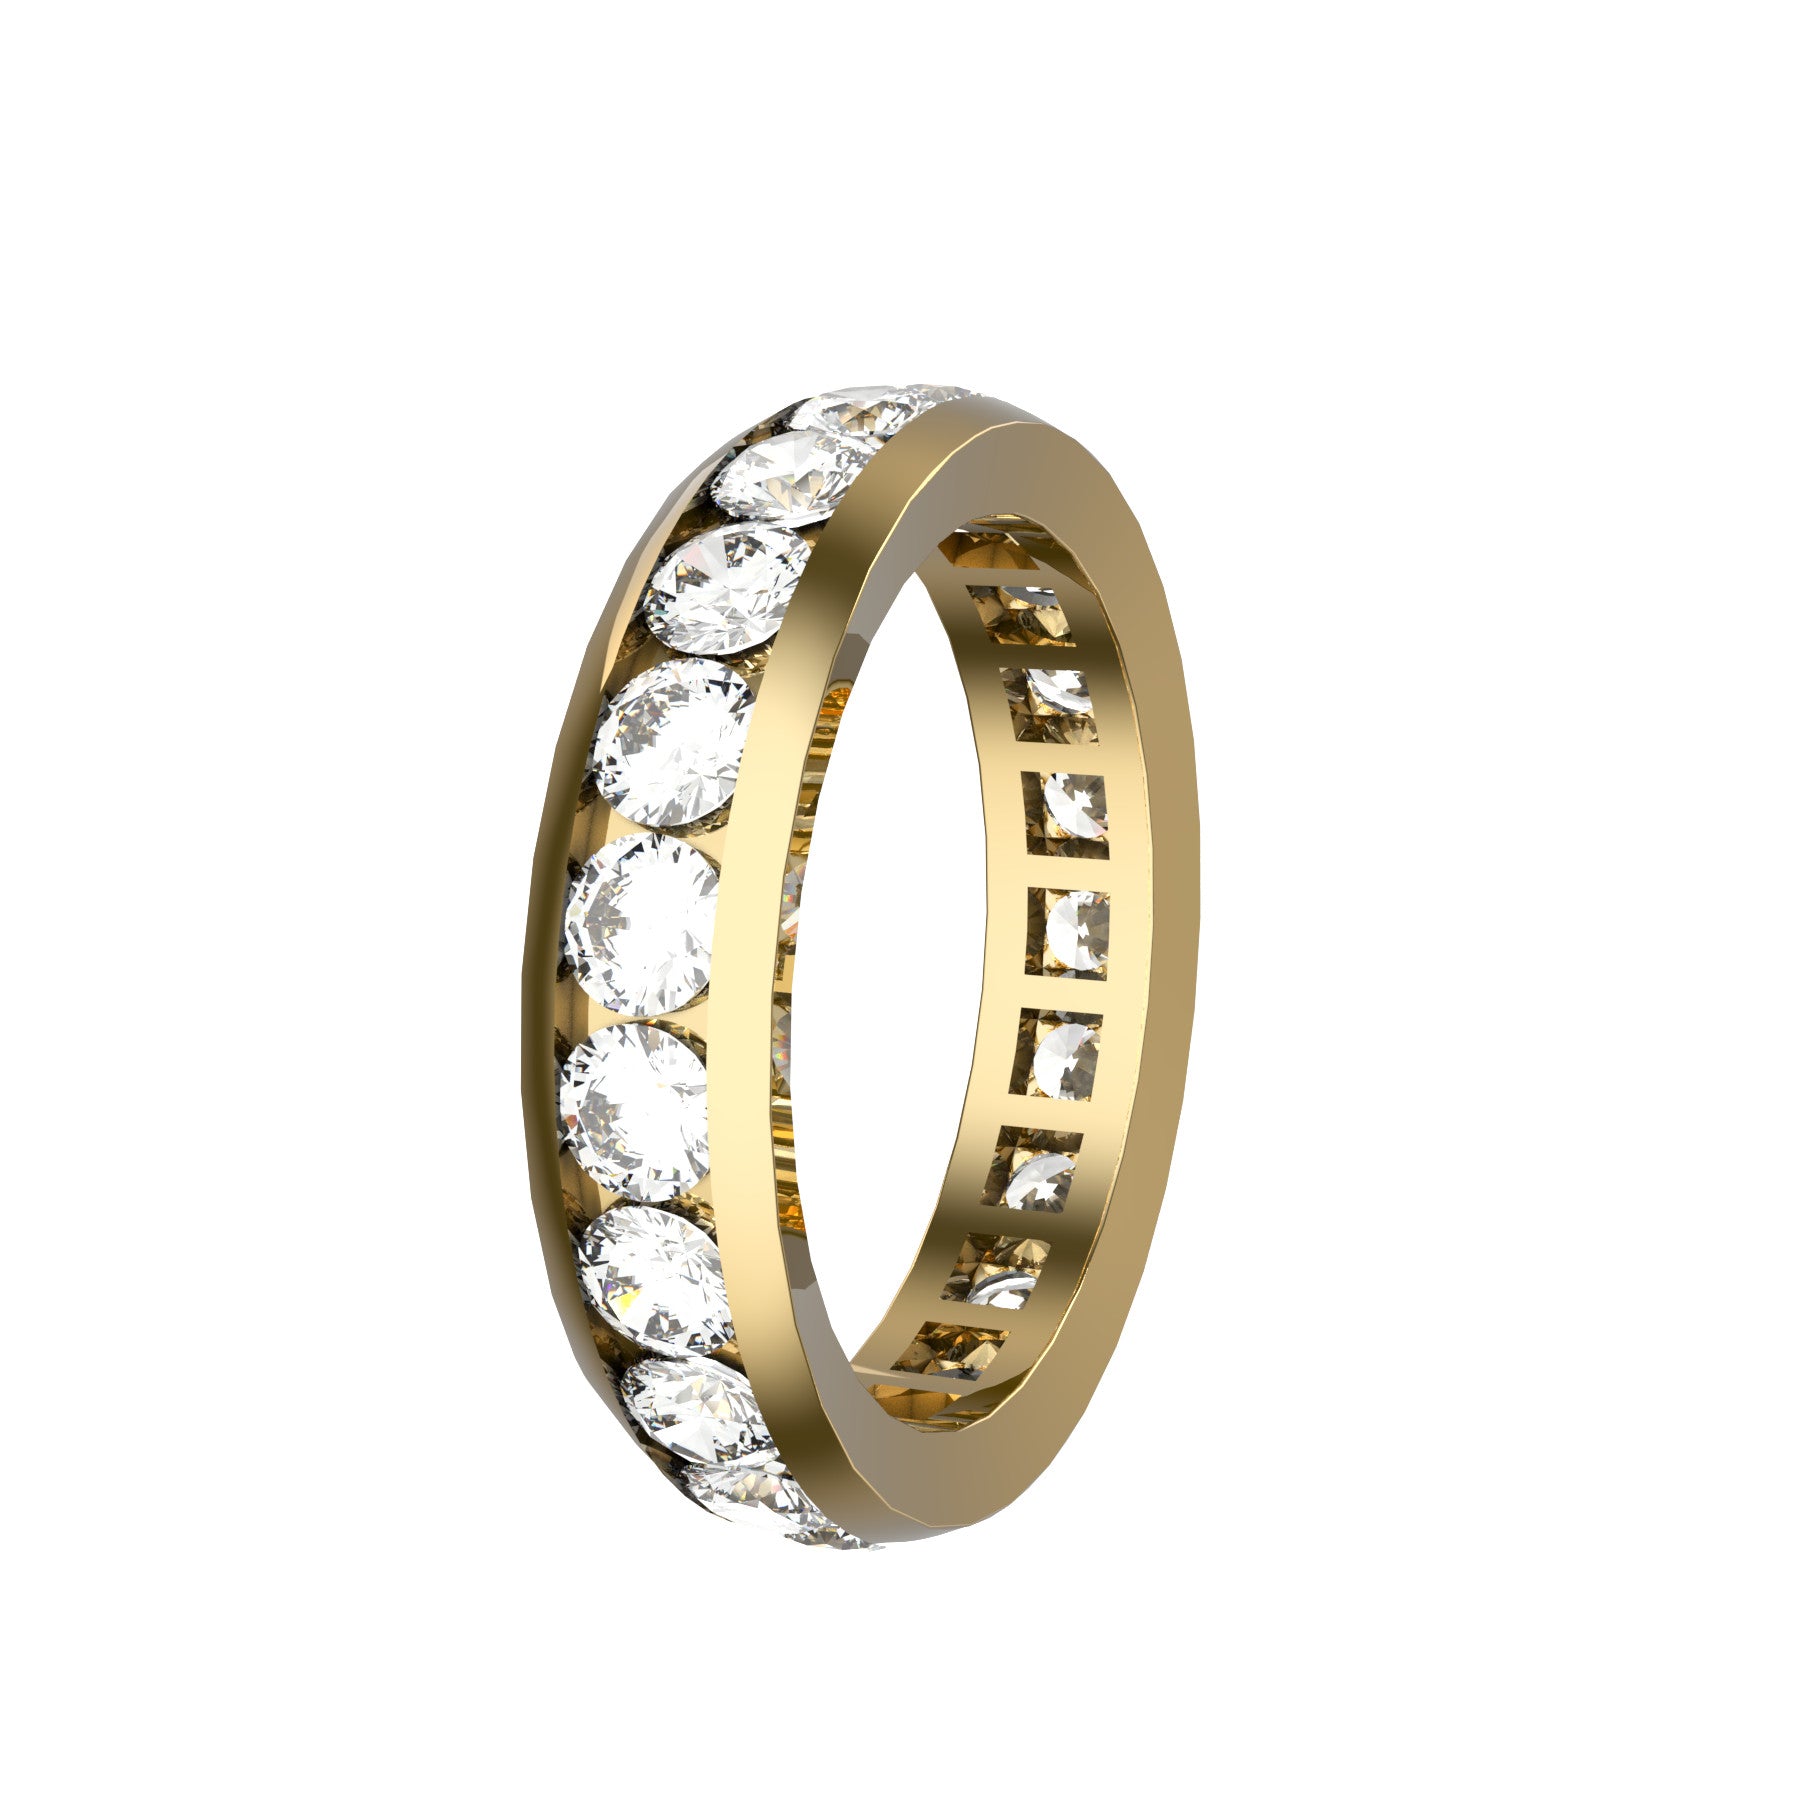 everlasting wedding band, 18 k yellow gold, 0,10 ct round natural diamonds, weight about 4,70 g. (0,16 oz), width 4,70 mm